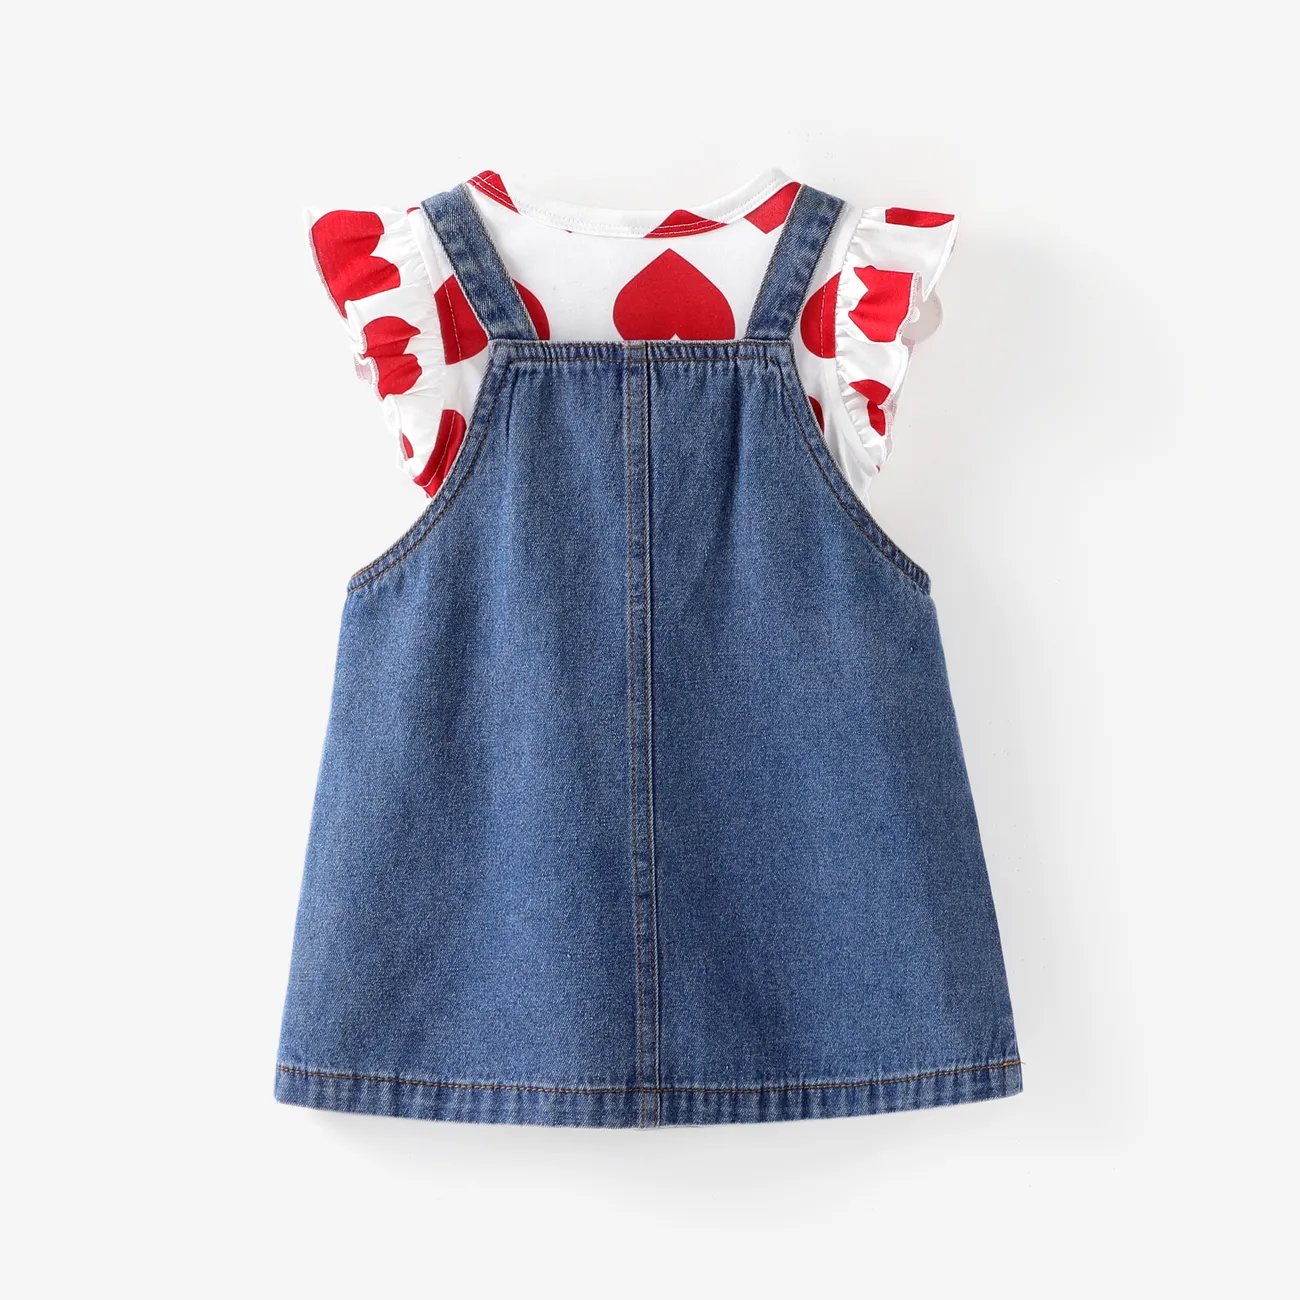 Baby Girl 2pcs Heart Print Tee and Heart Rabbit Embroidery Denim Overall Dress Set REDWHITE big image 1